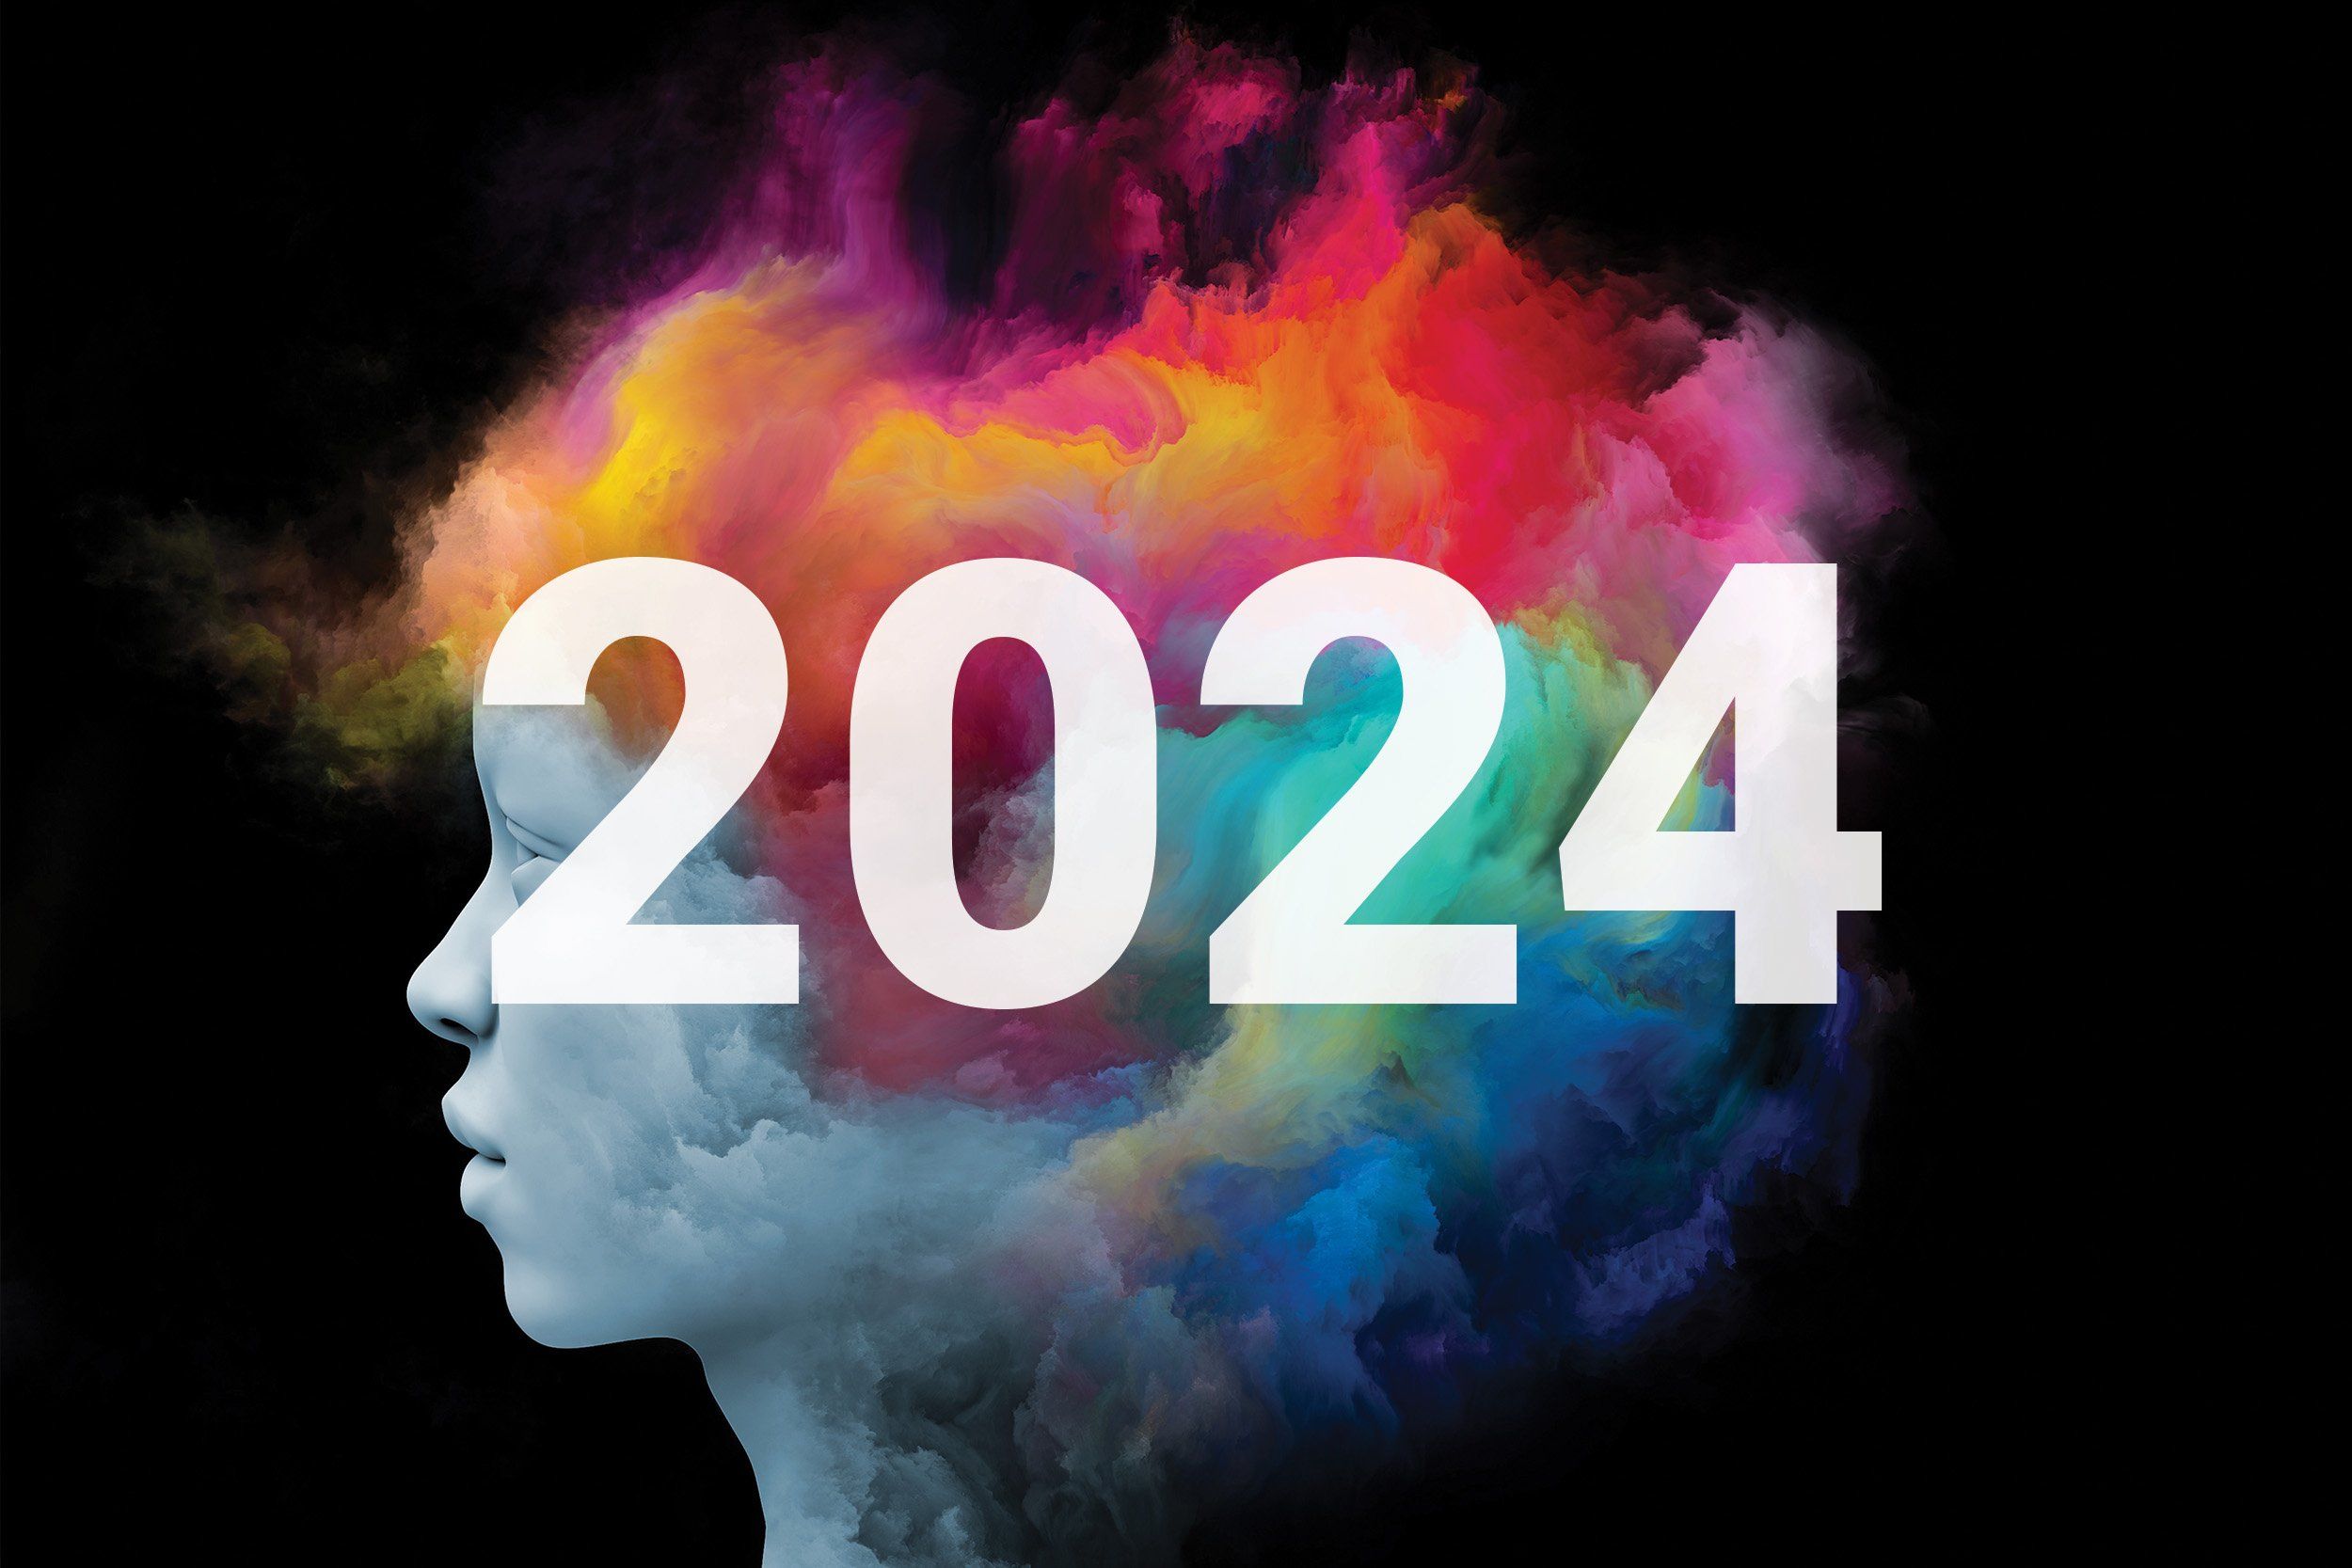 Profile of woman in midst of psychedelic treatment with "2024" overlay. 